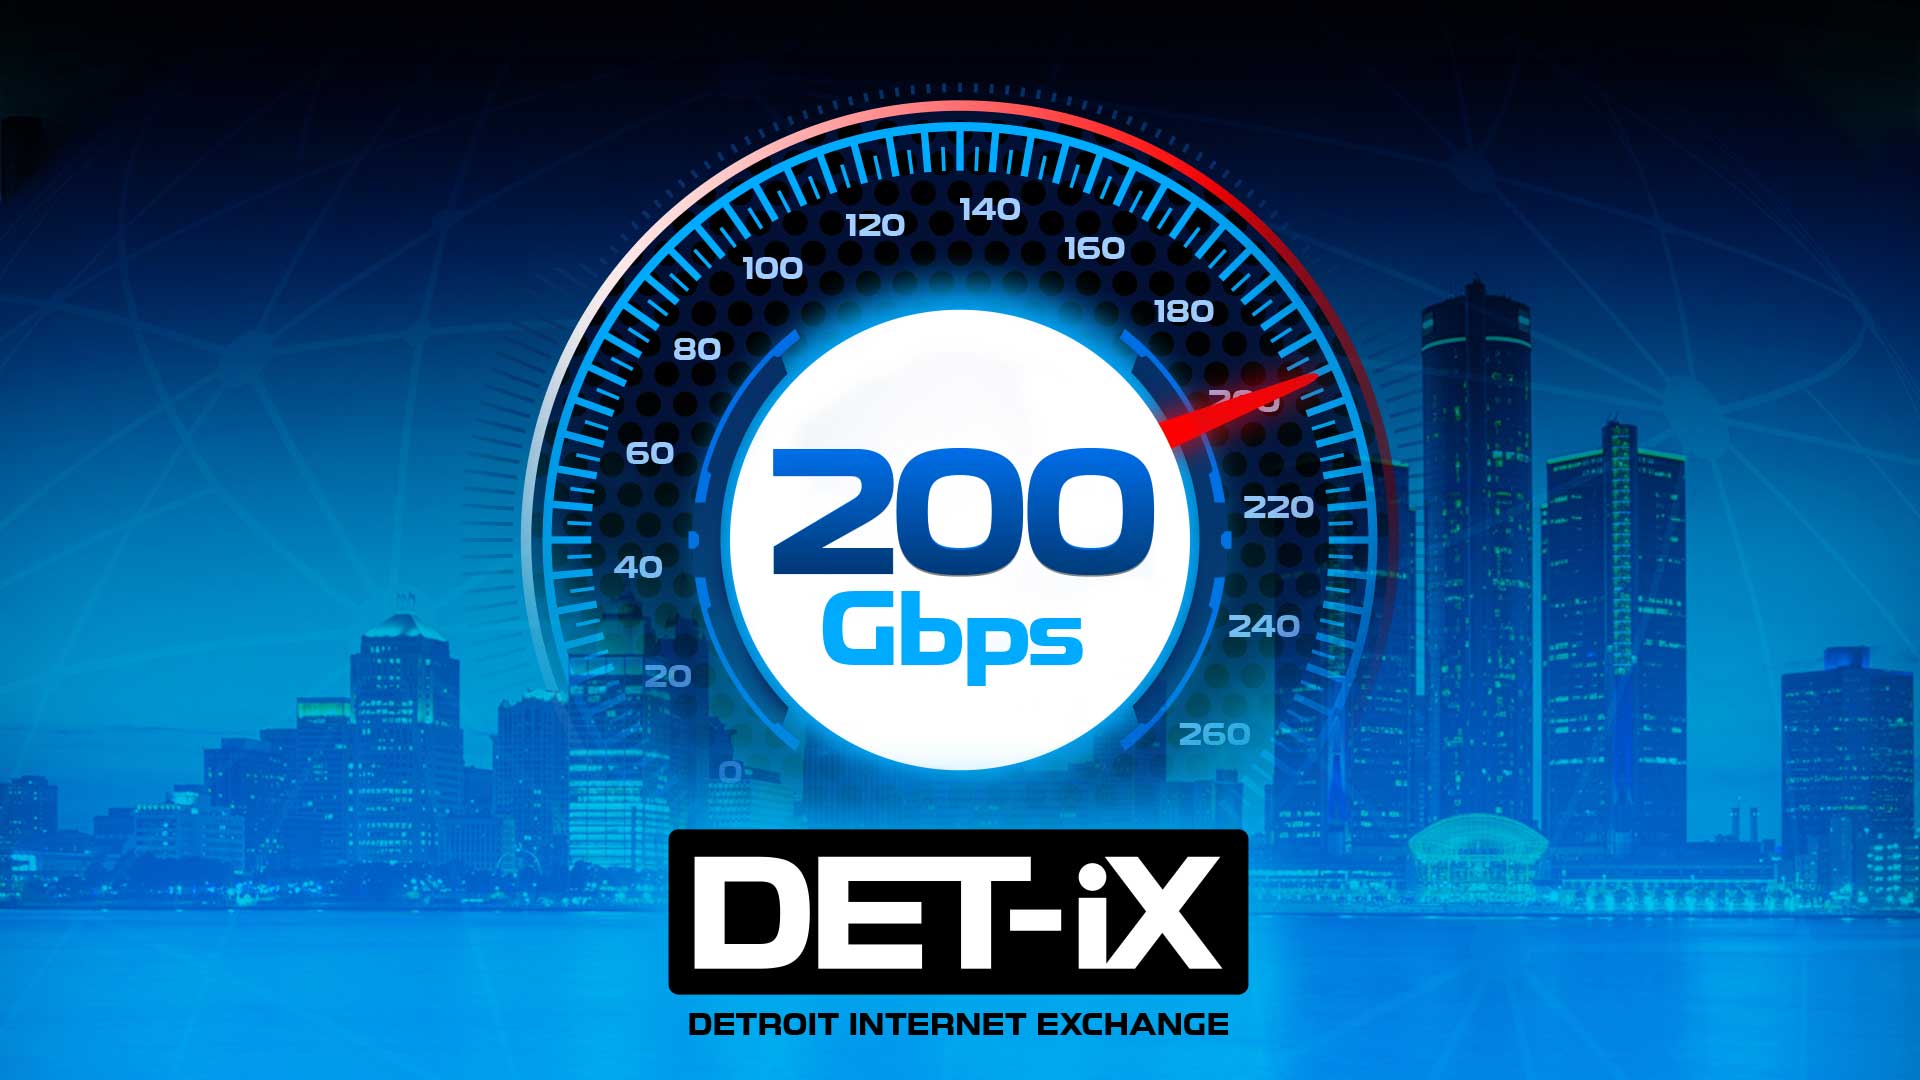 Detroit Internet Exchange reaches 200Gbps connectivity rate cover image